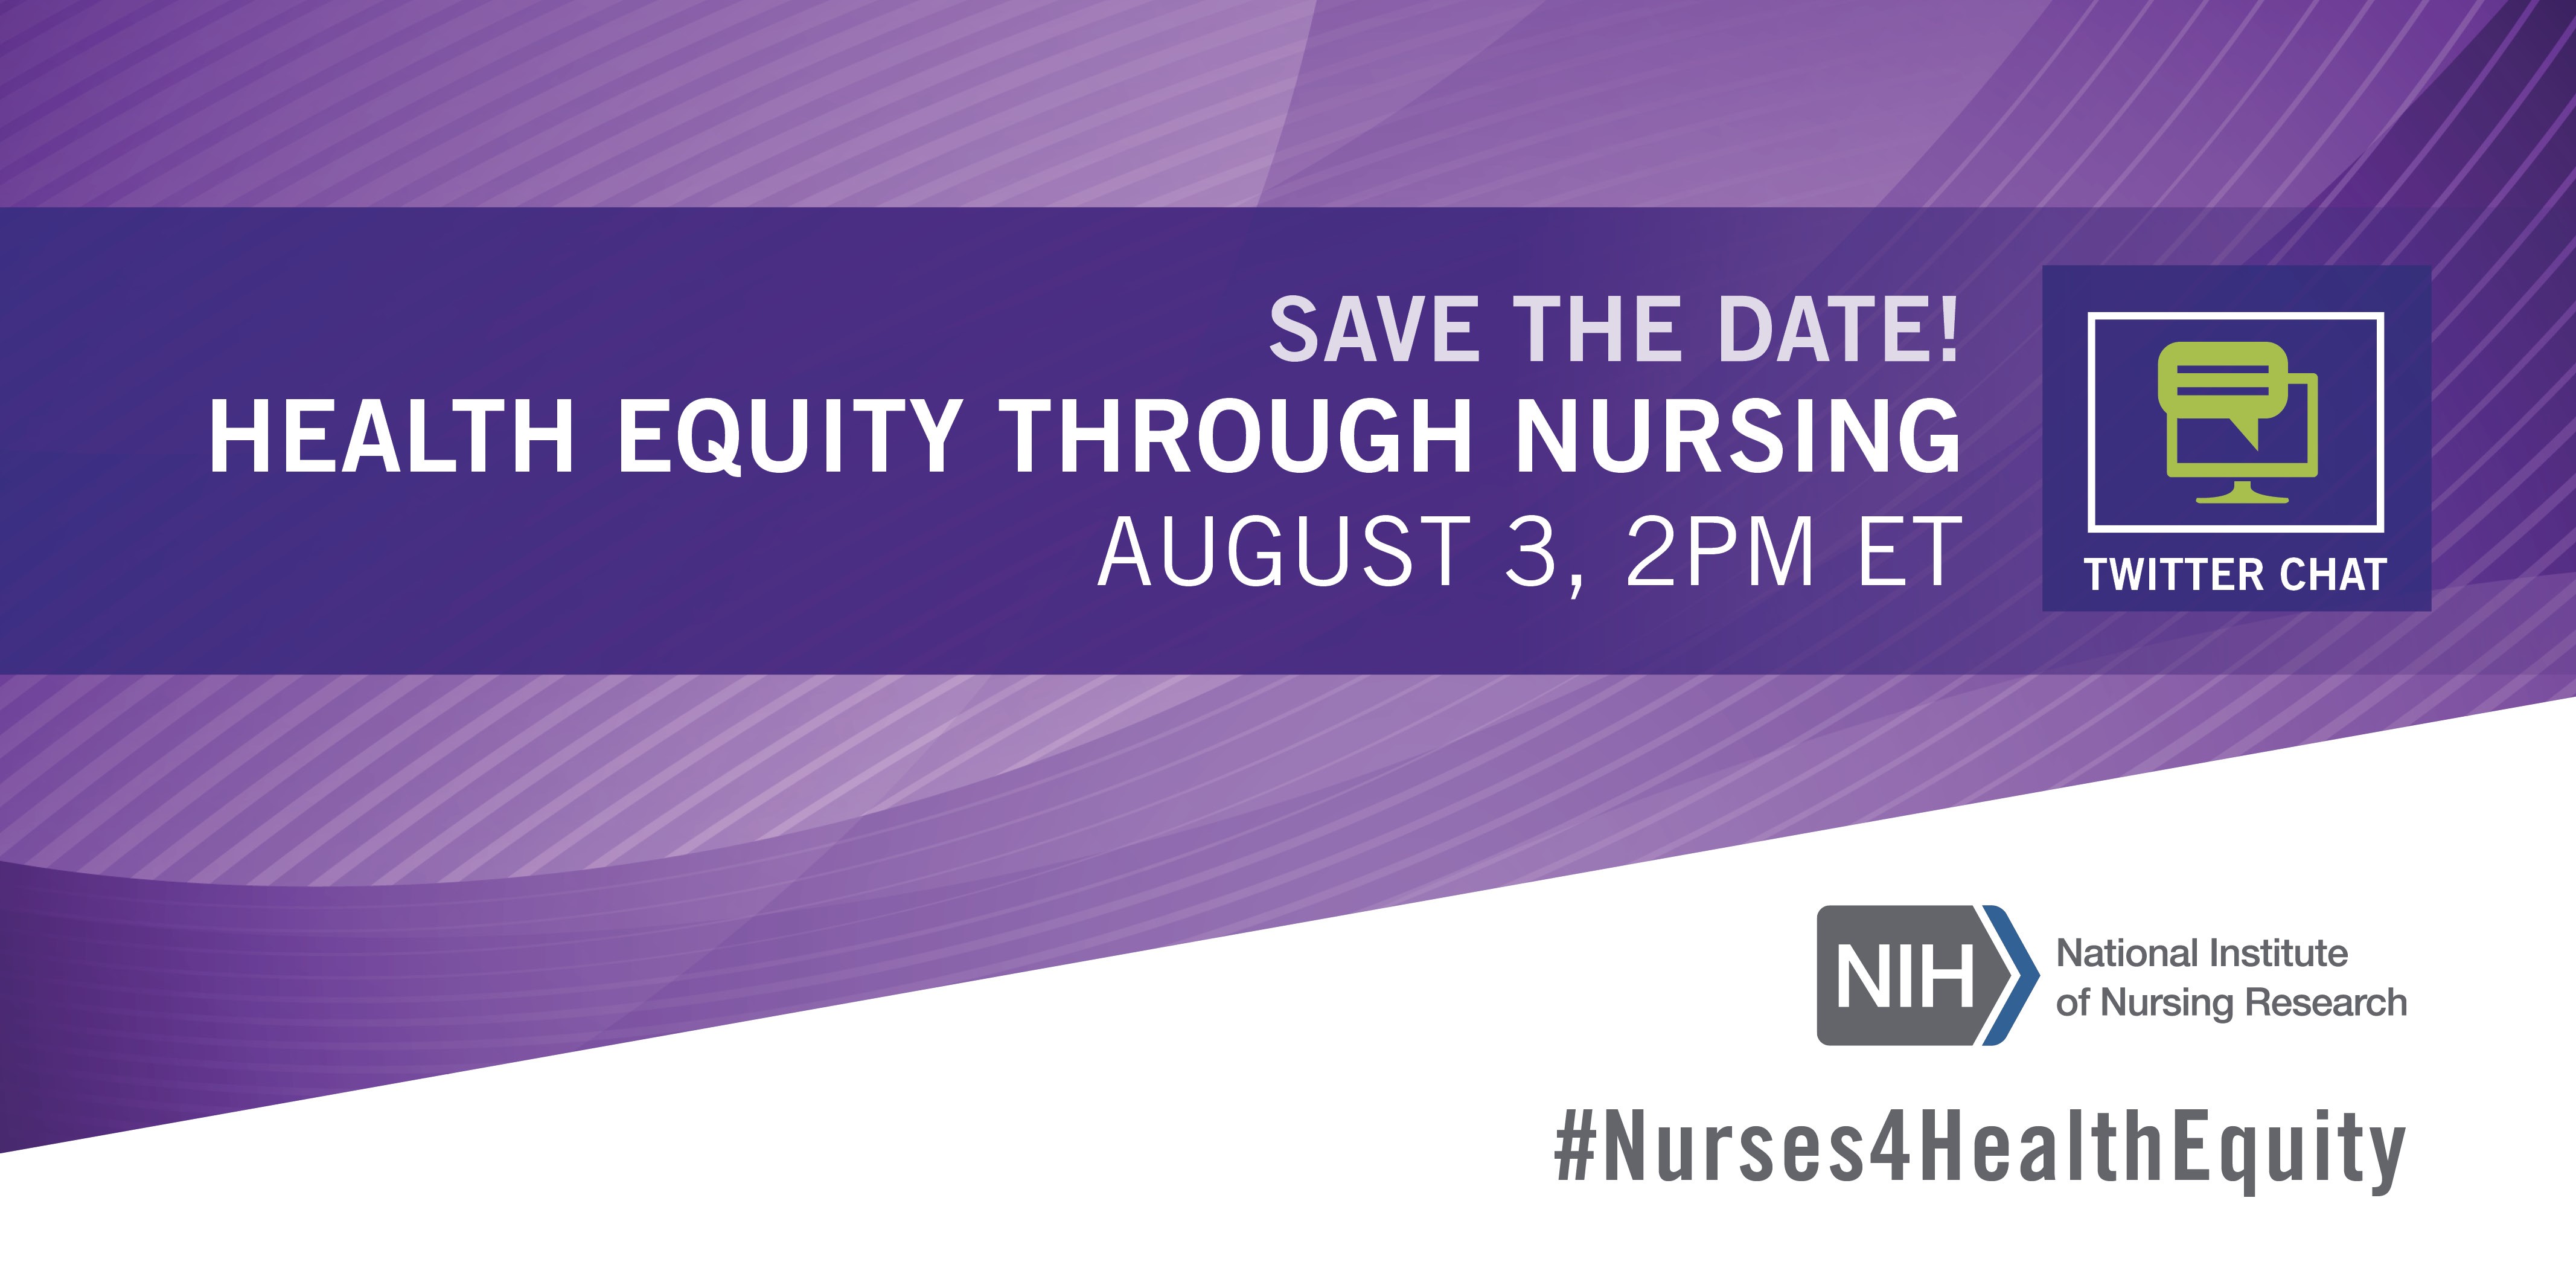 Save the Date: Health Equity Through Nursing - August 3, 2 PM